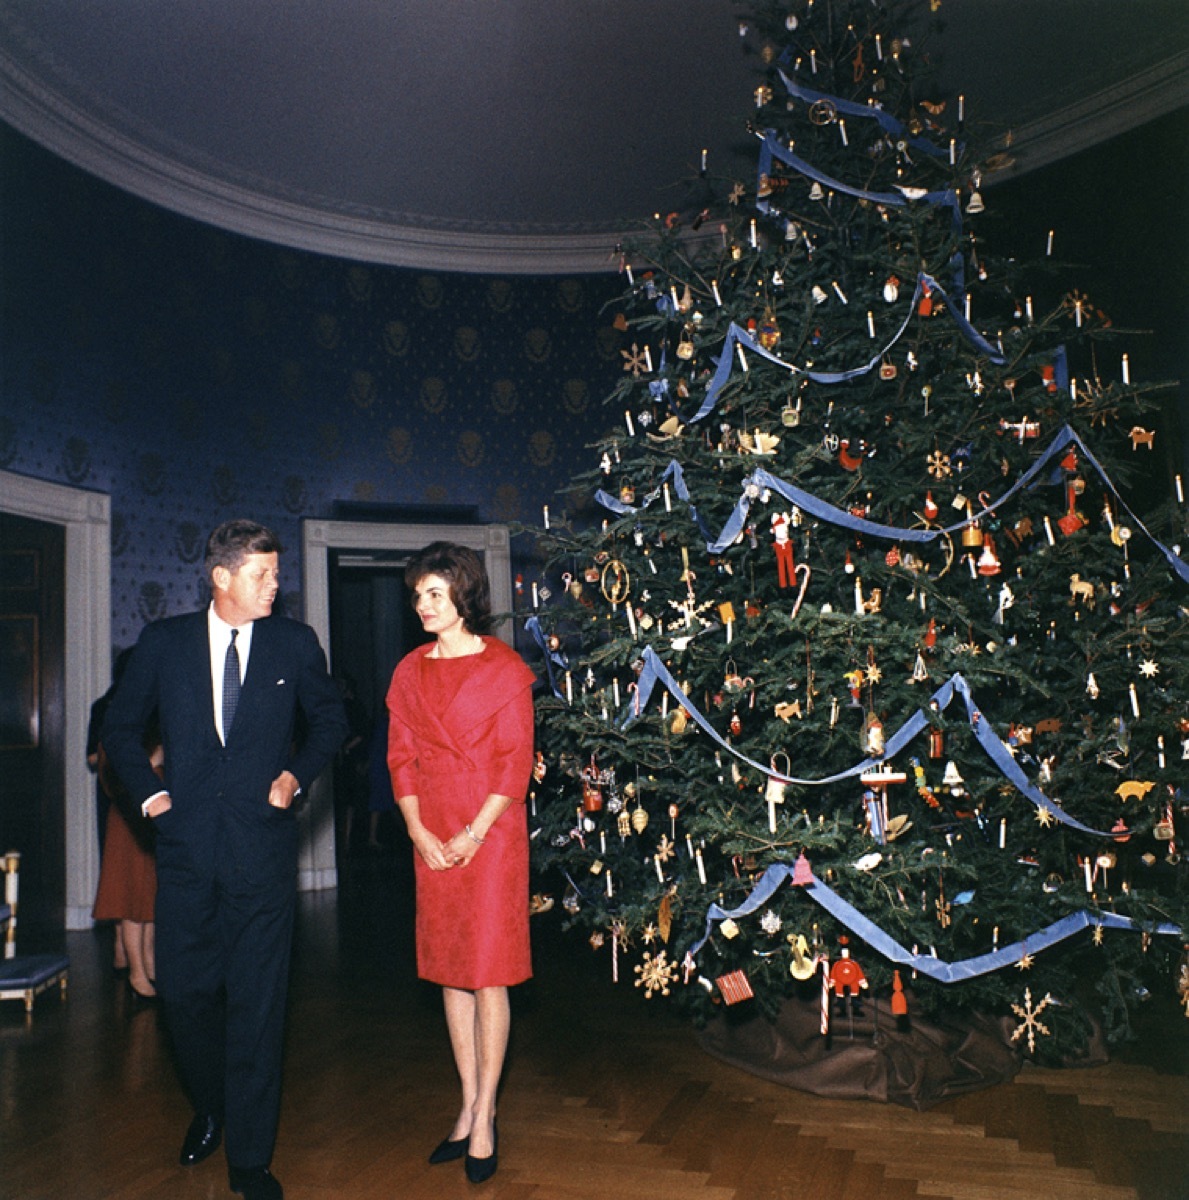 john f. kennedy and jaqueline kennedy onassis in blue room at white house with christmas tree